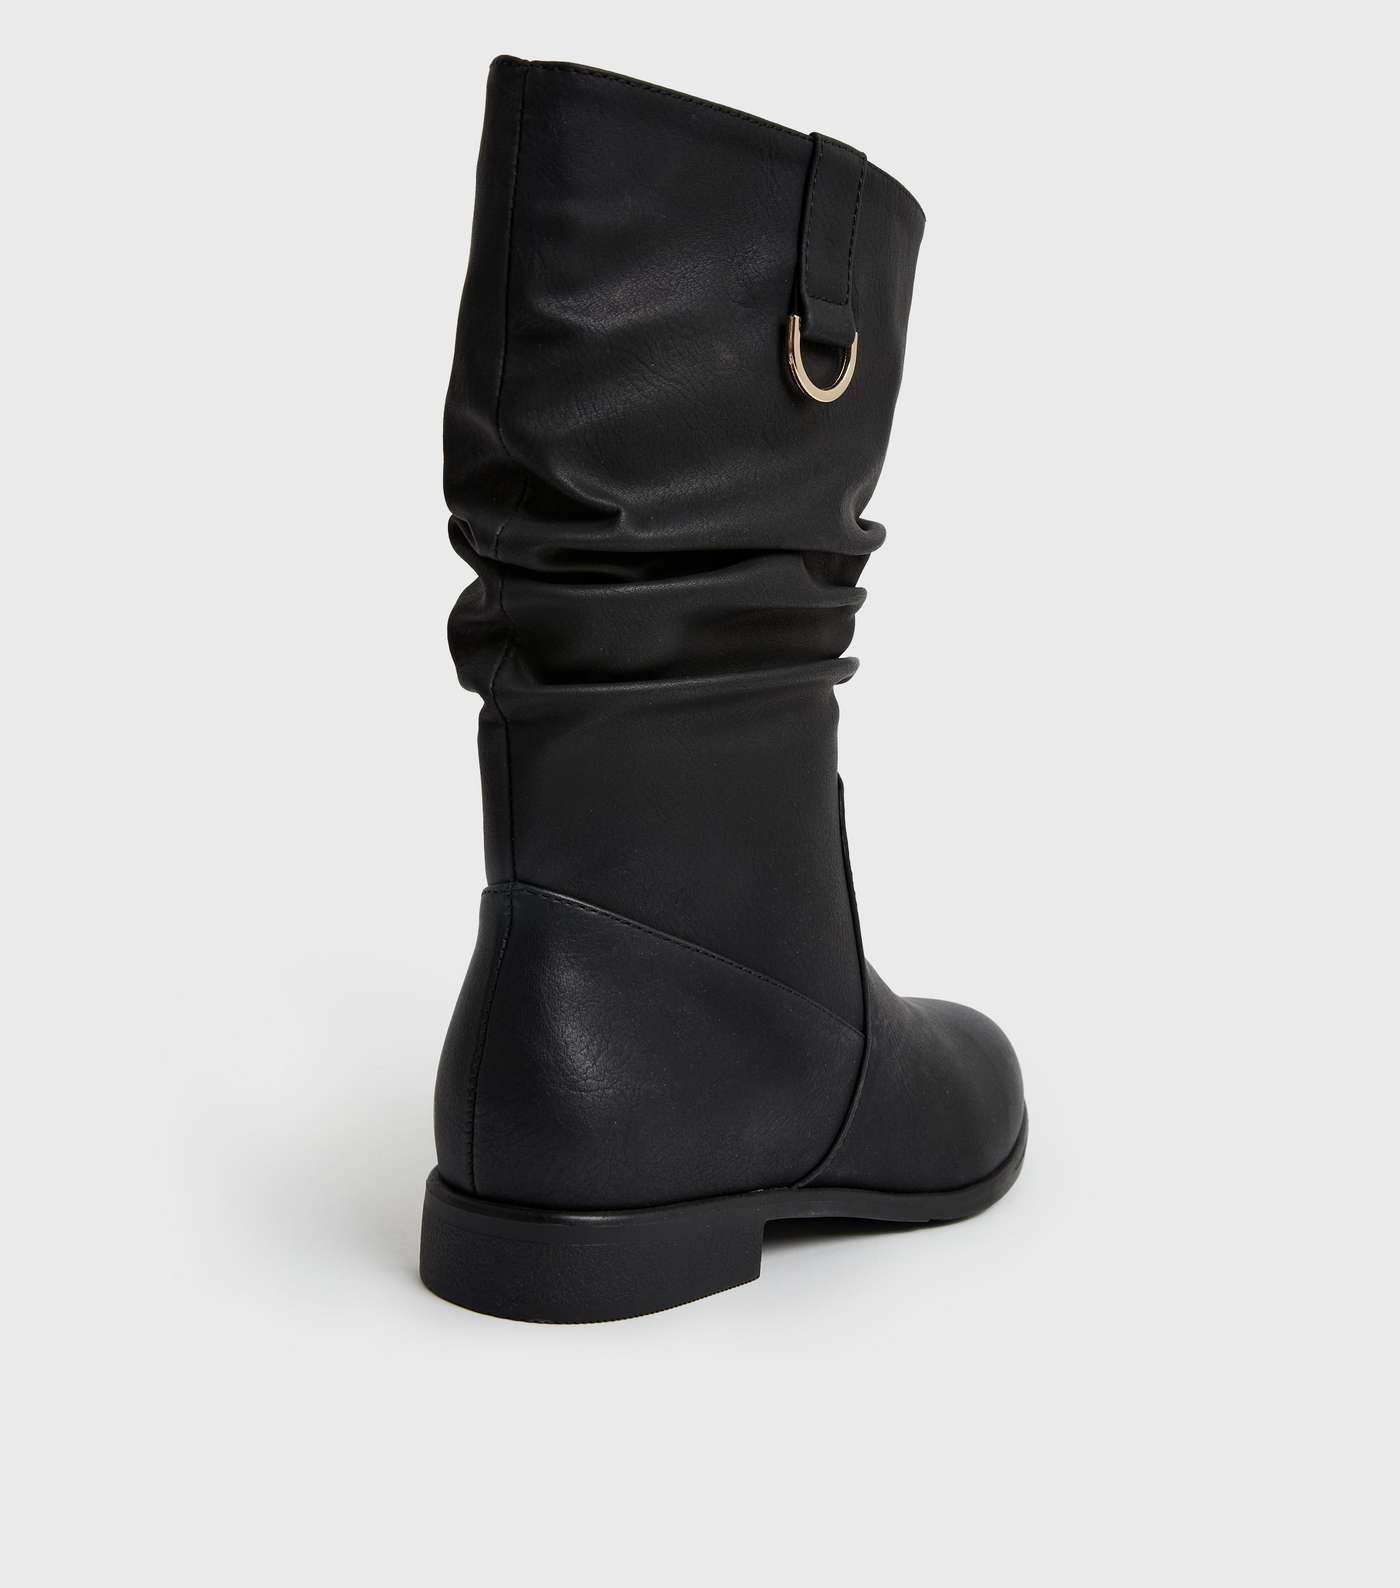 Black Leather-Look Mid Calf Slouch Boots Image 3